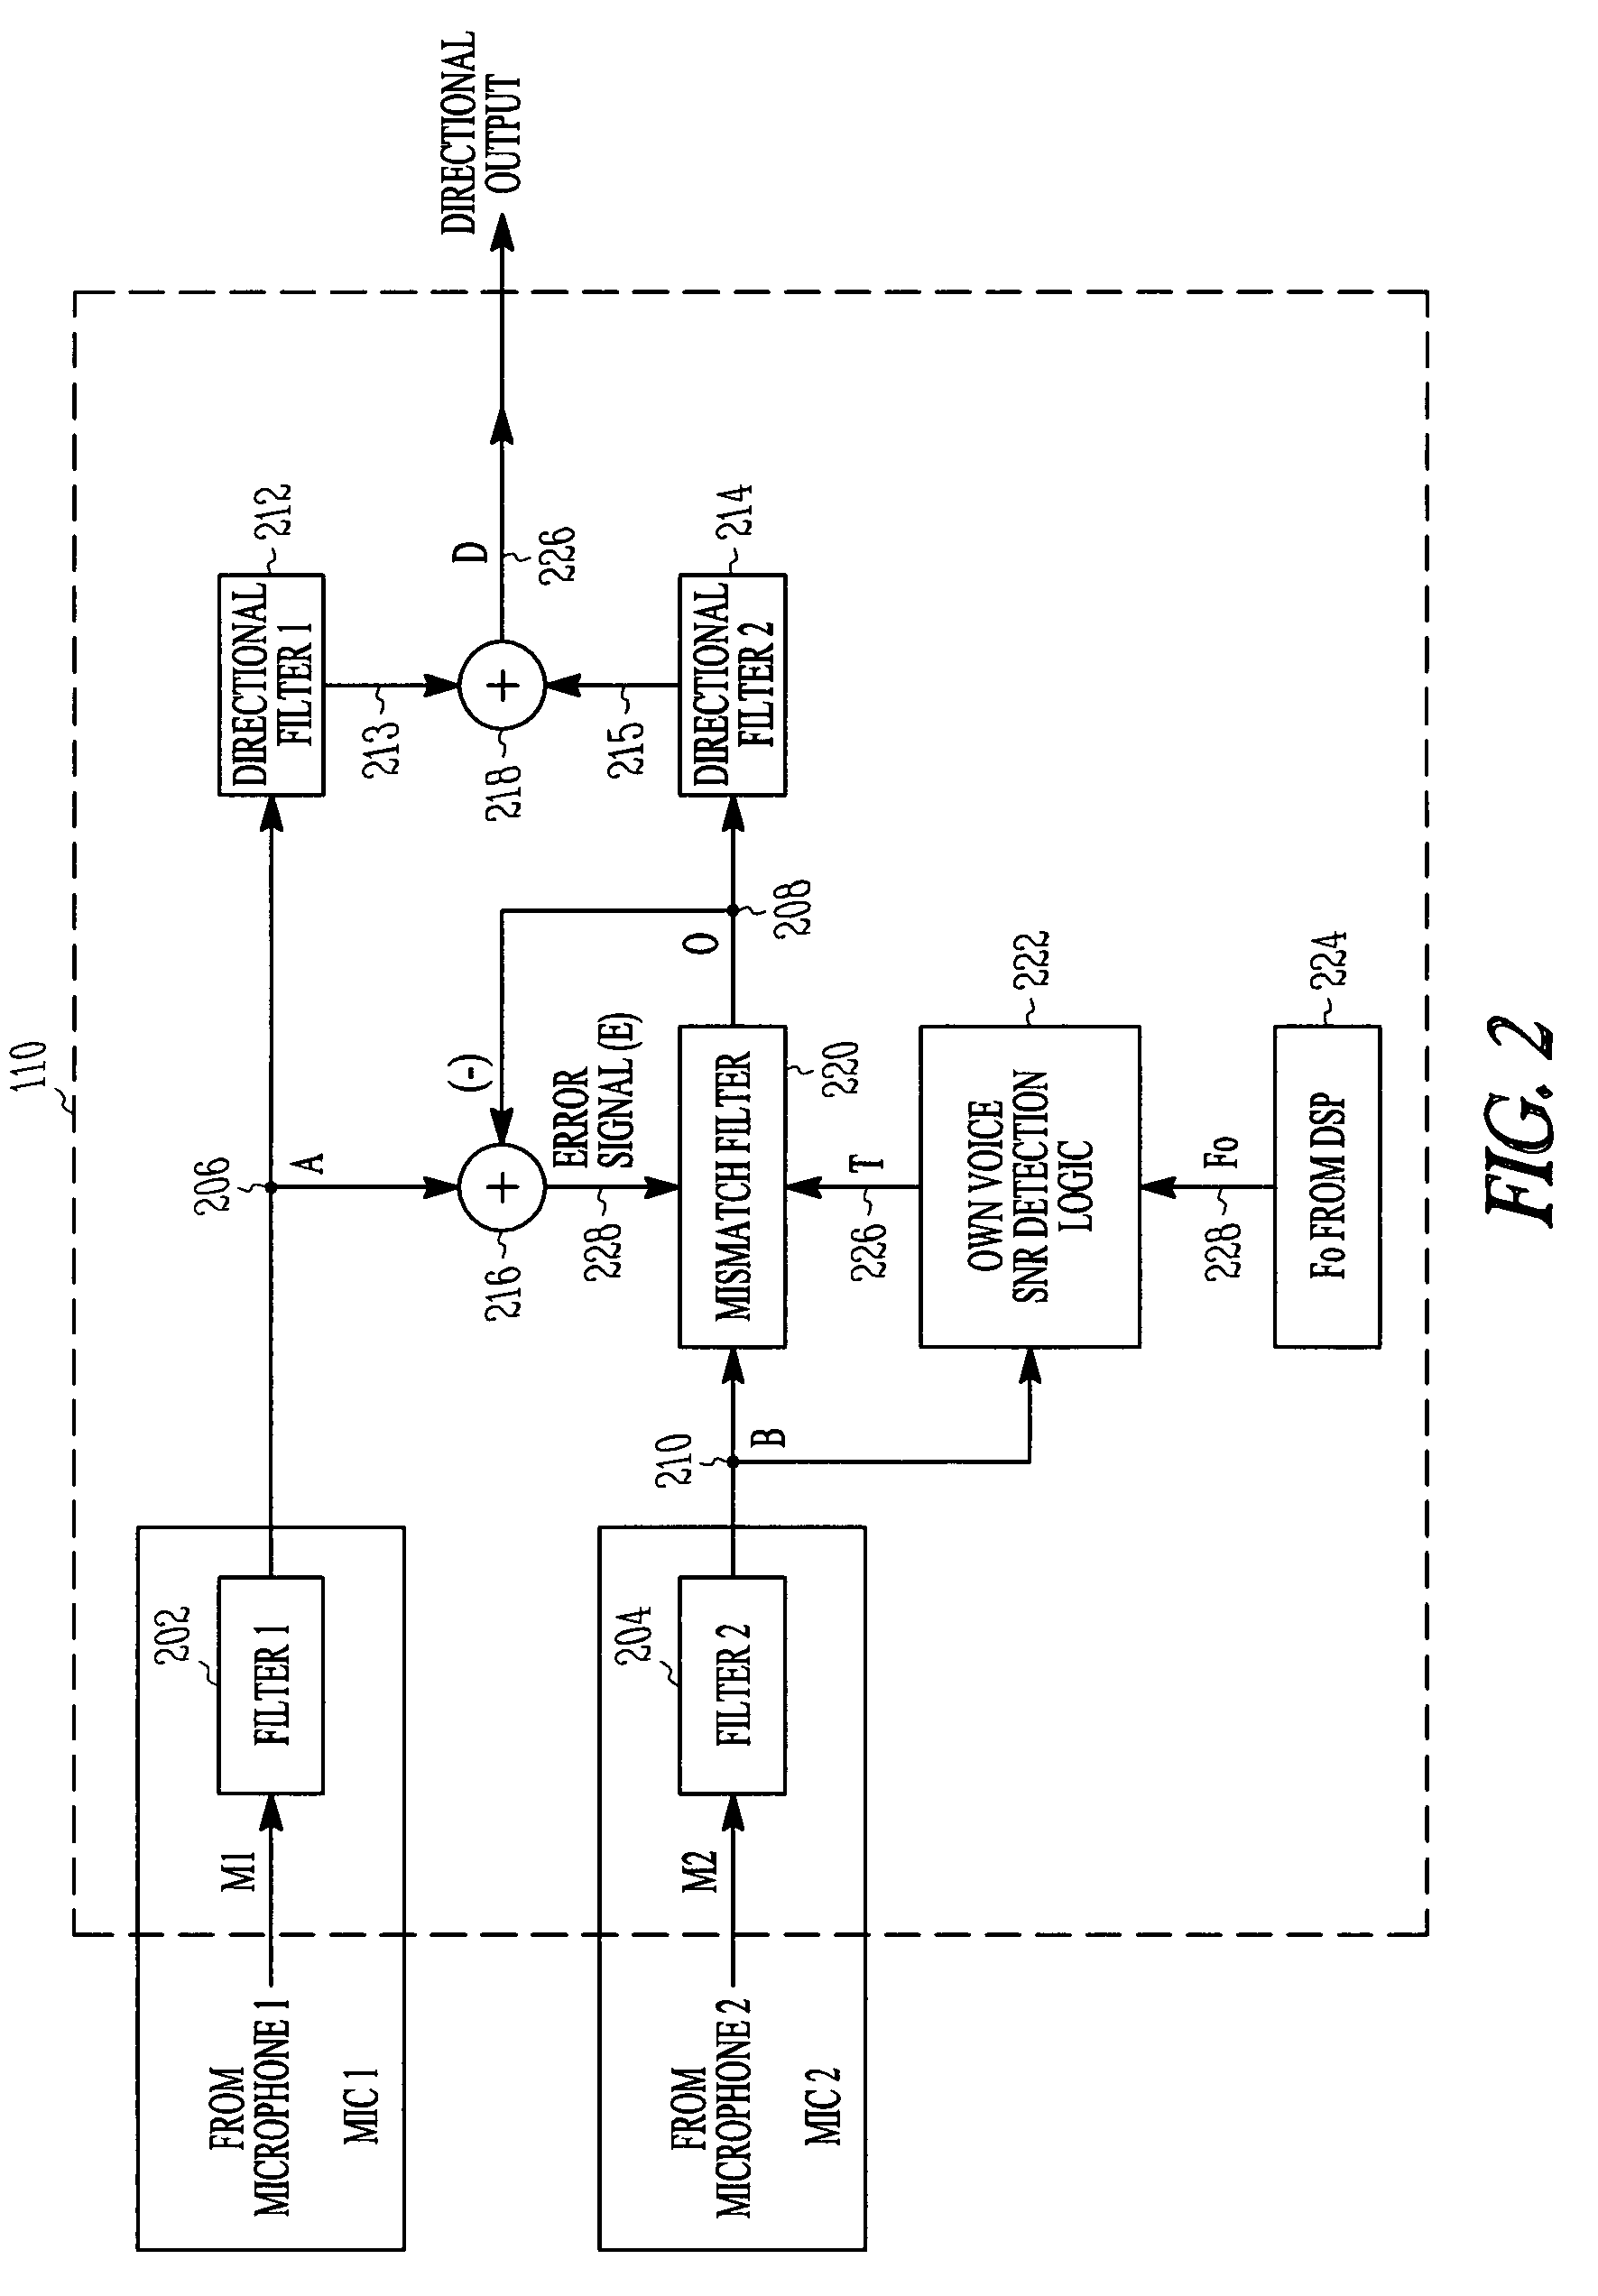 Method and apparatus for microphone matching for wearable directional hearing device using wearer's own voice